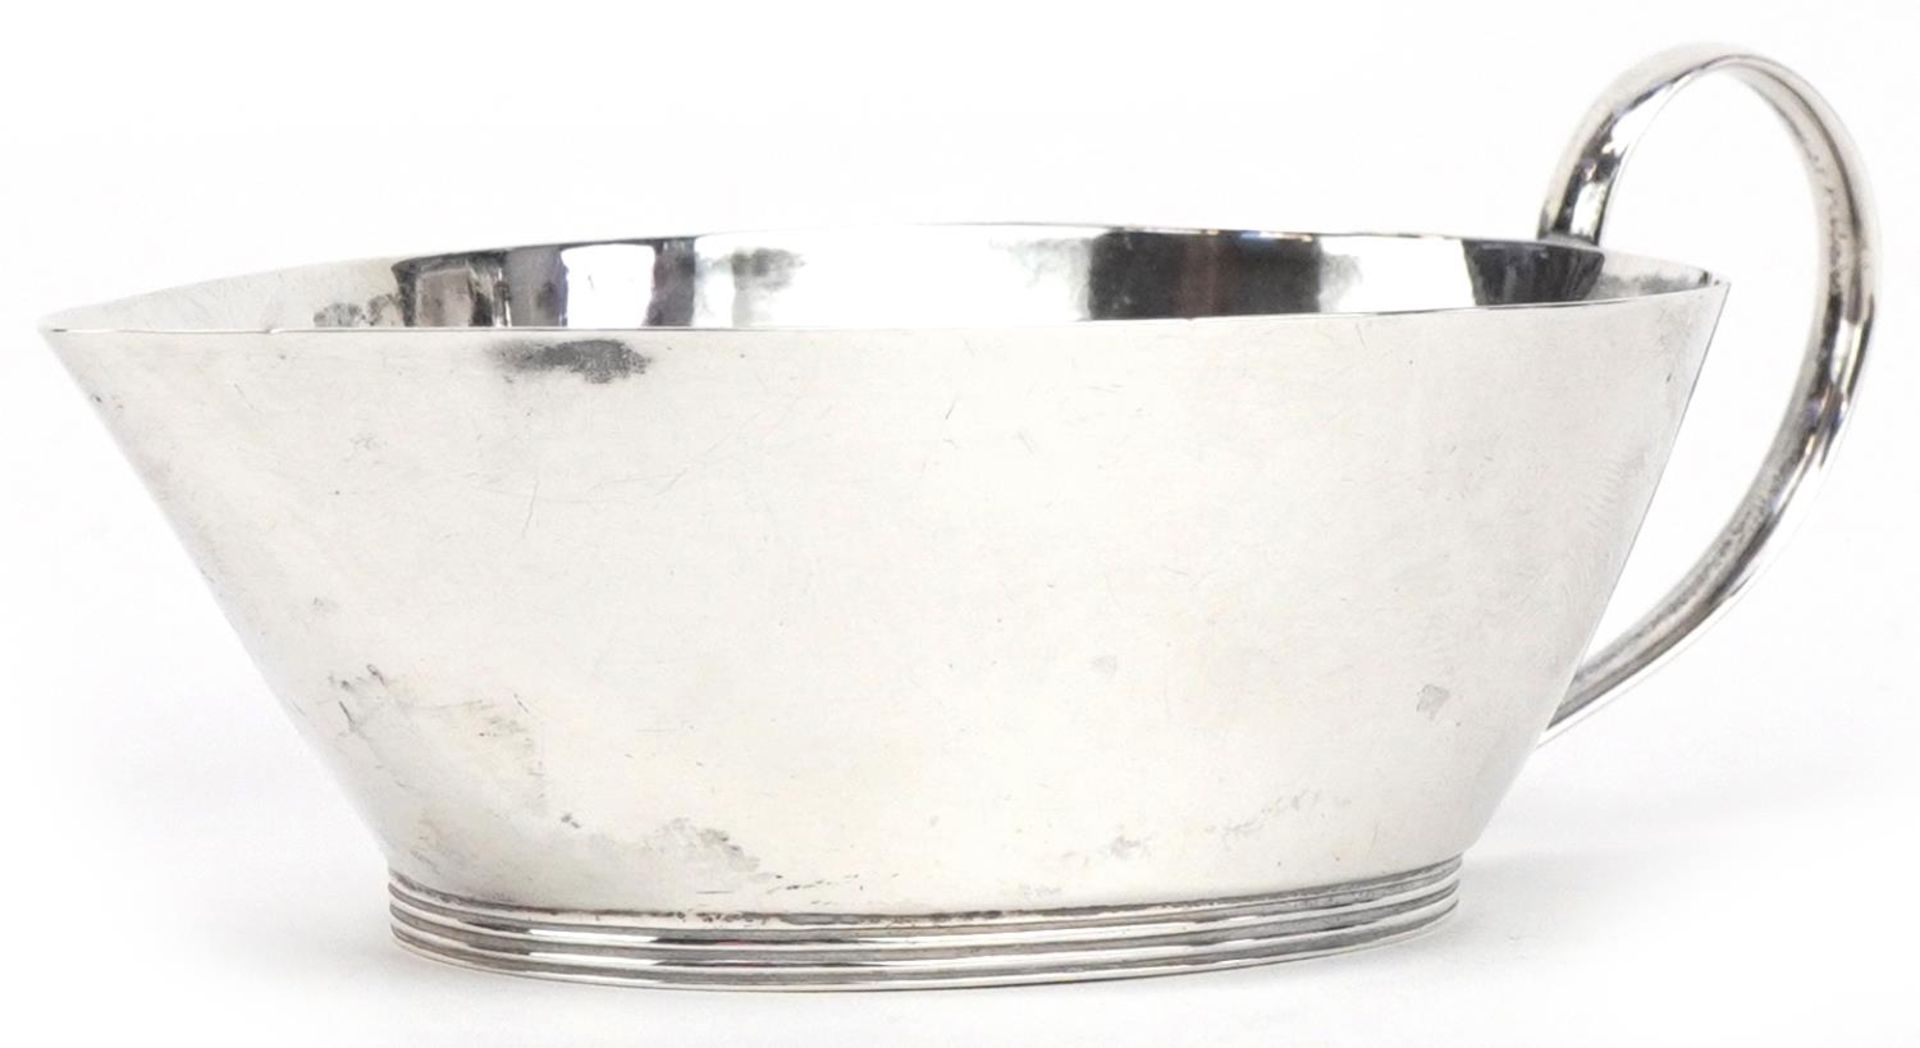 Joseph Rodgers & Sons, Edwardian silver pap boat, Sheffield 1906, 12cm in length, 47.8g : For